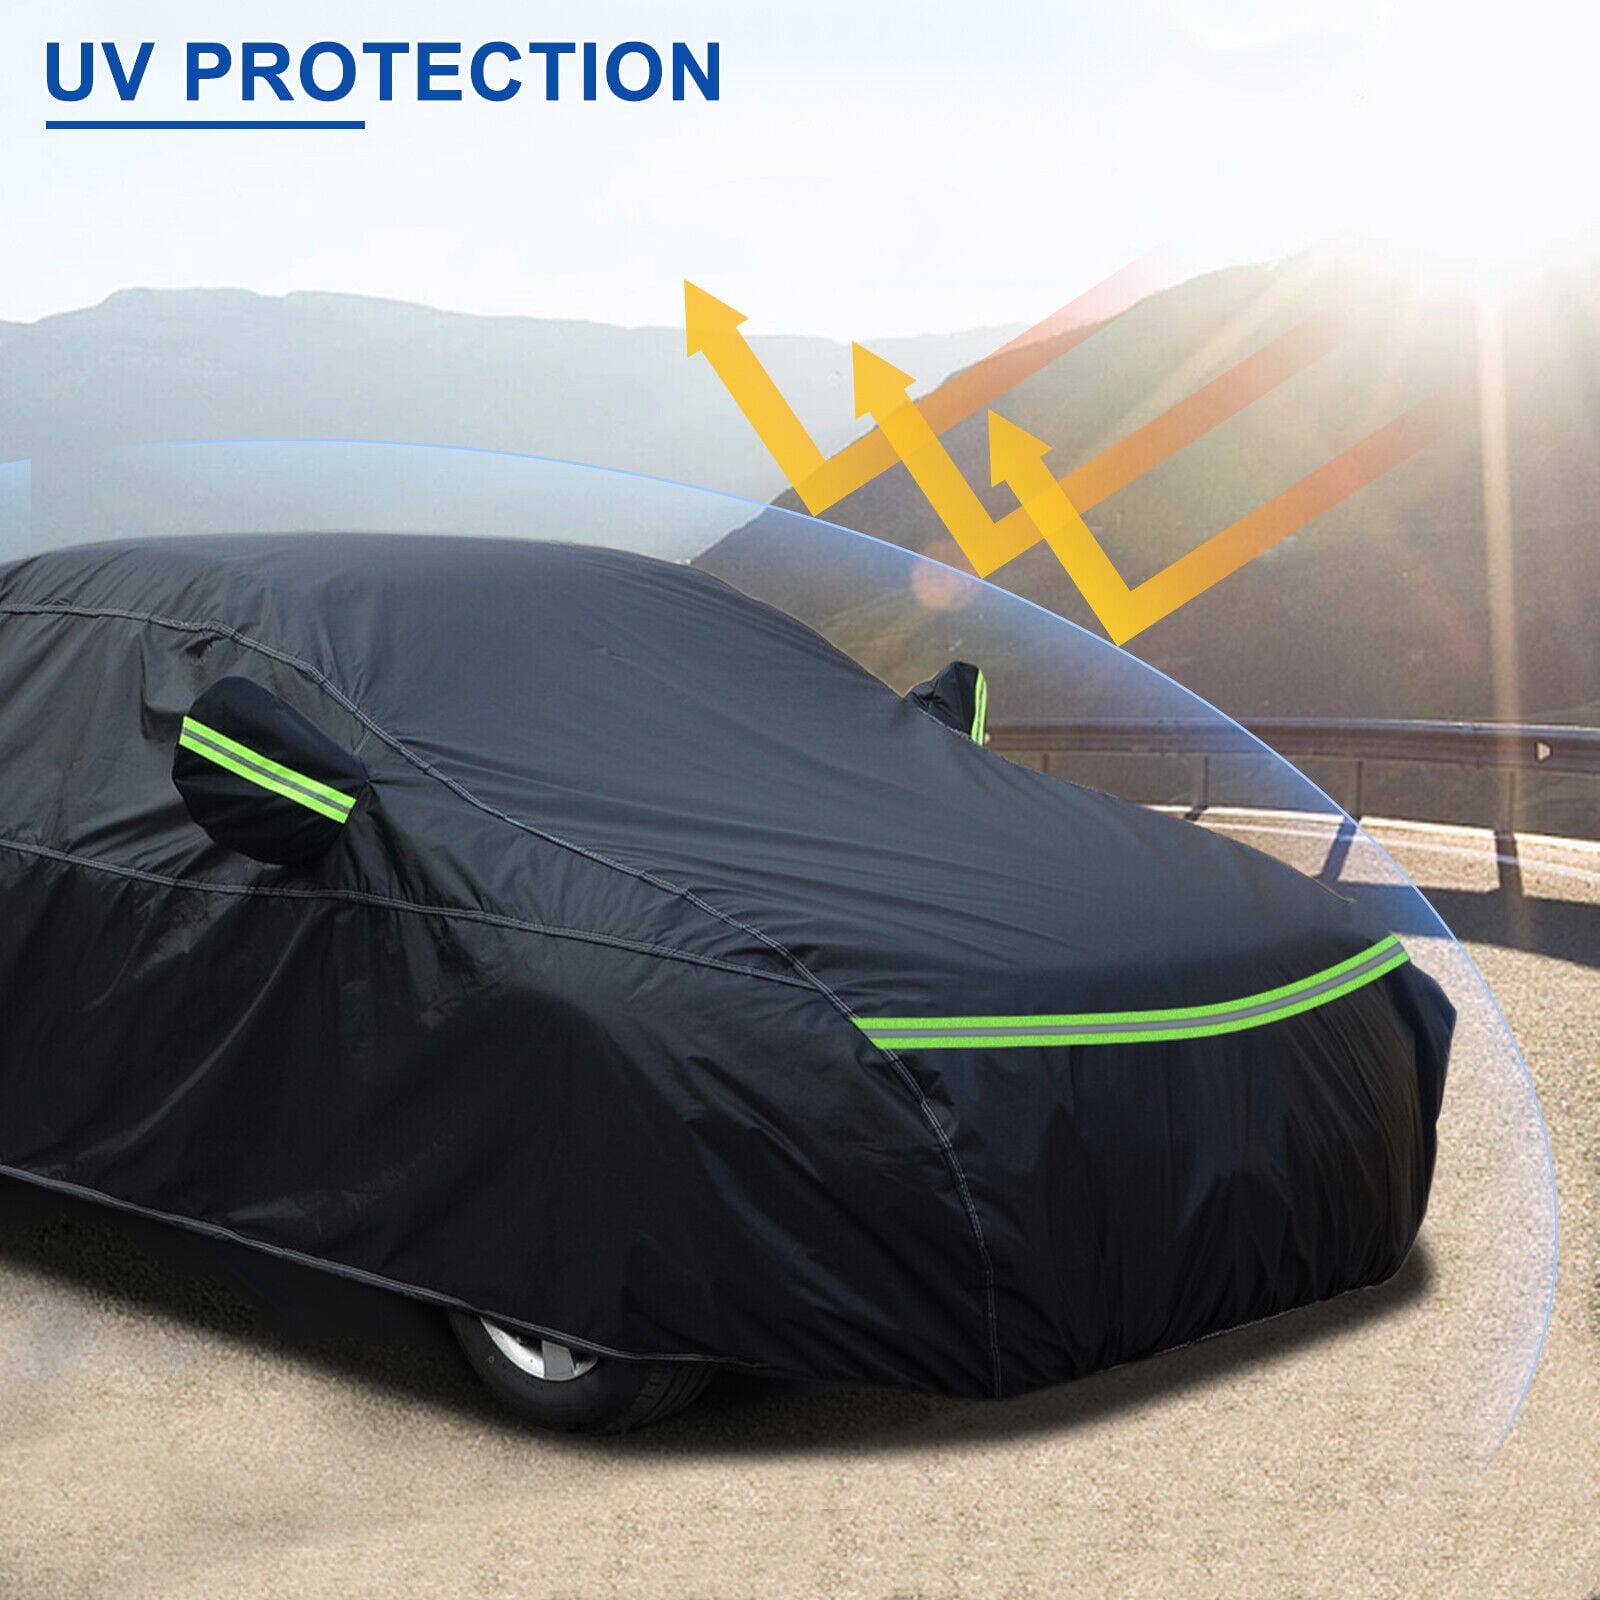  CarCovers Weatherproof Car Cover Compatible with Hyundai  2017-2019 Elantra Sedan 4 Door - Outdoor & Indoor Cover - Rain, Snow, Hail,  Sun - Theft Cable Lock, Bag & Wind Straps : Automotive